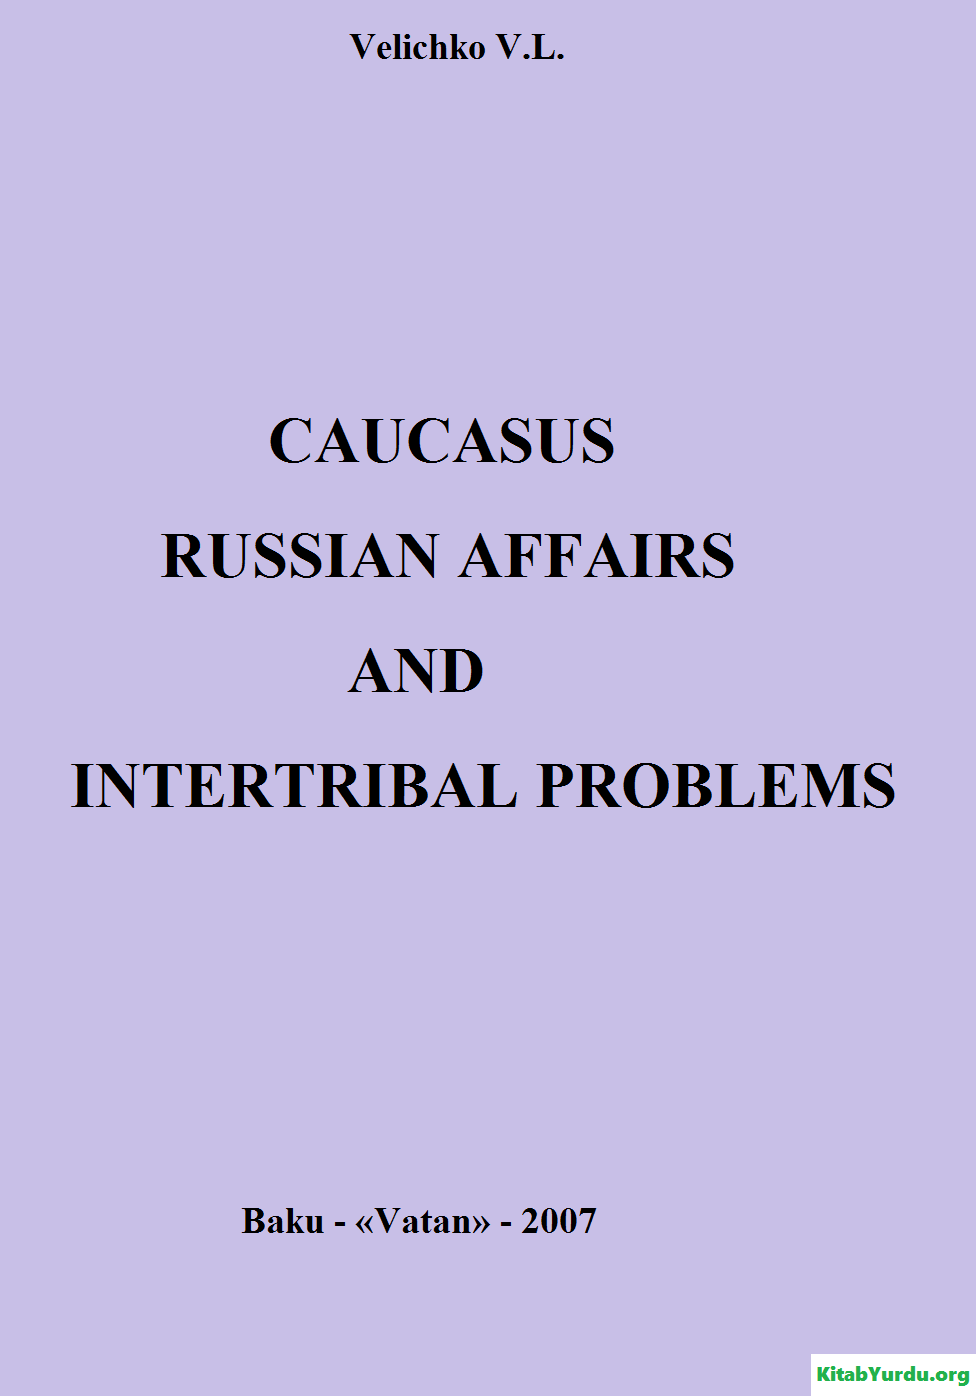 CAUCASUS RUSSIAN AFFAIRS AND INTERTRIBAL PROBLEMS